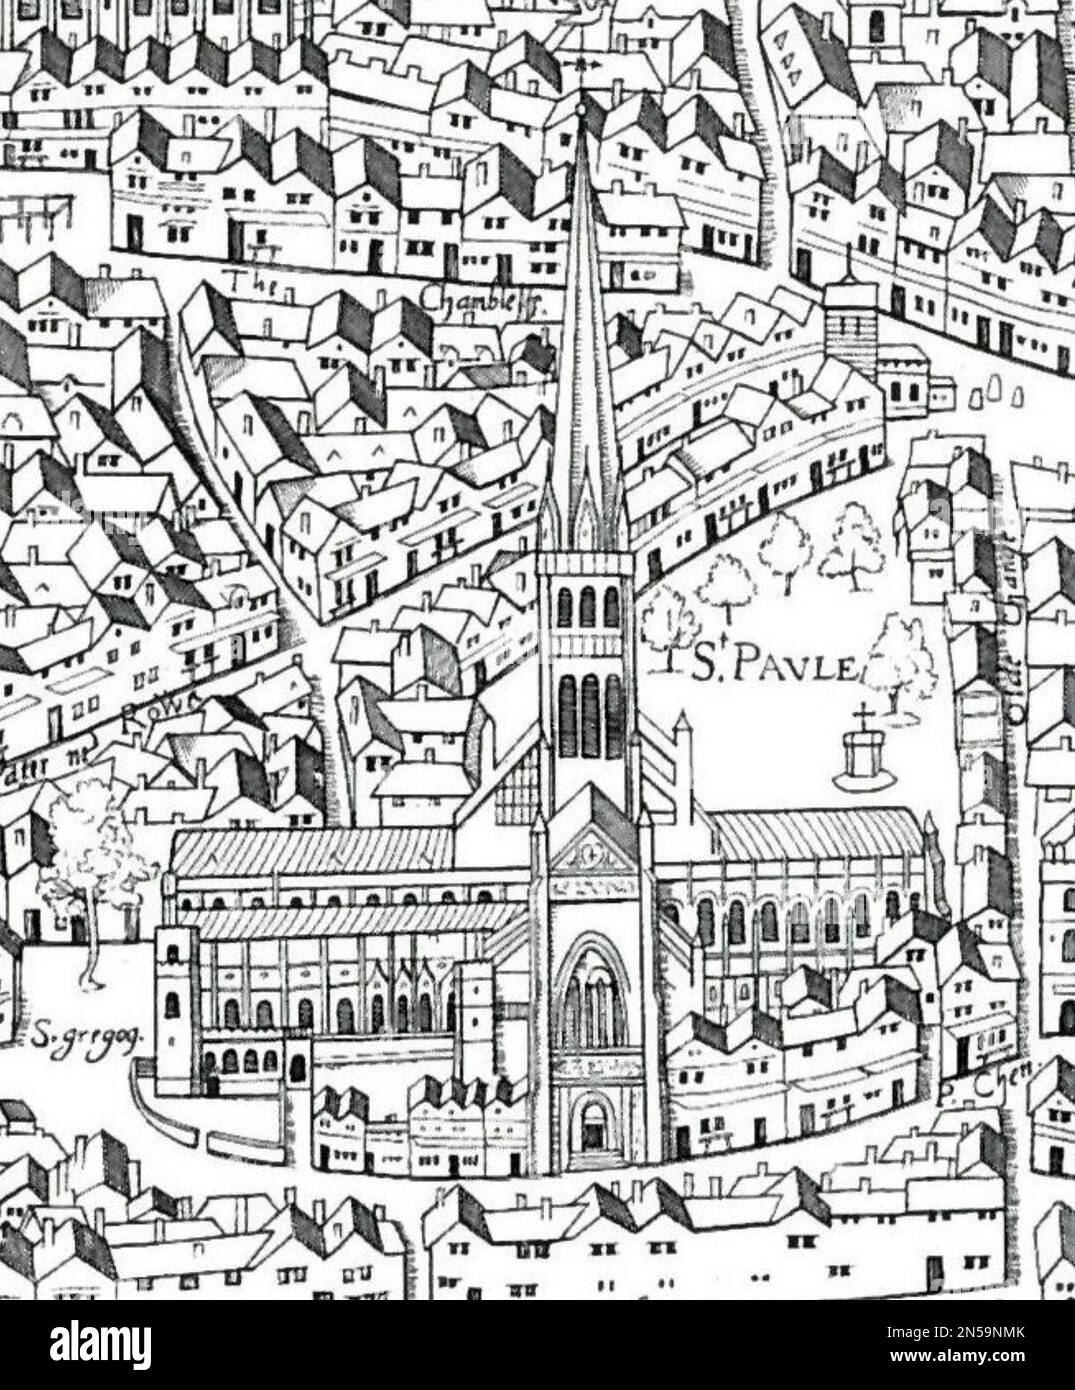 ST PAUL'S CATHEDRAL  in the Copperplate Map of London, published 1553-1559. Stock Photo